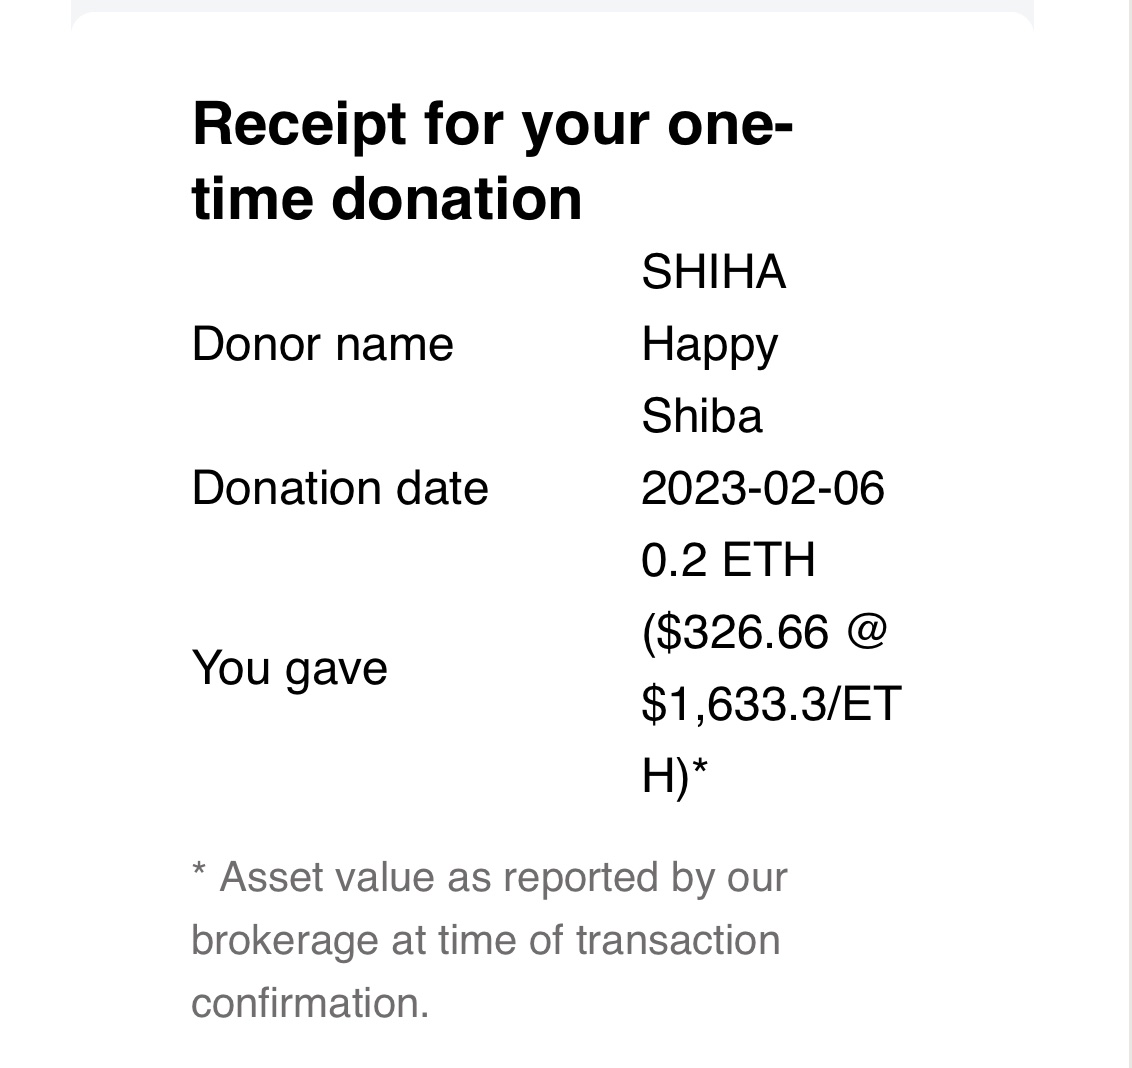 Second donation done!